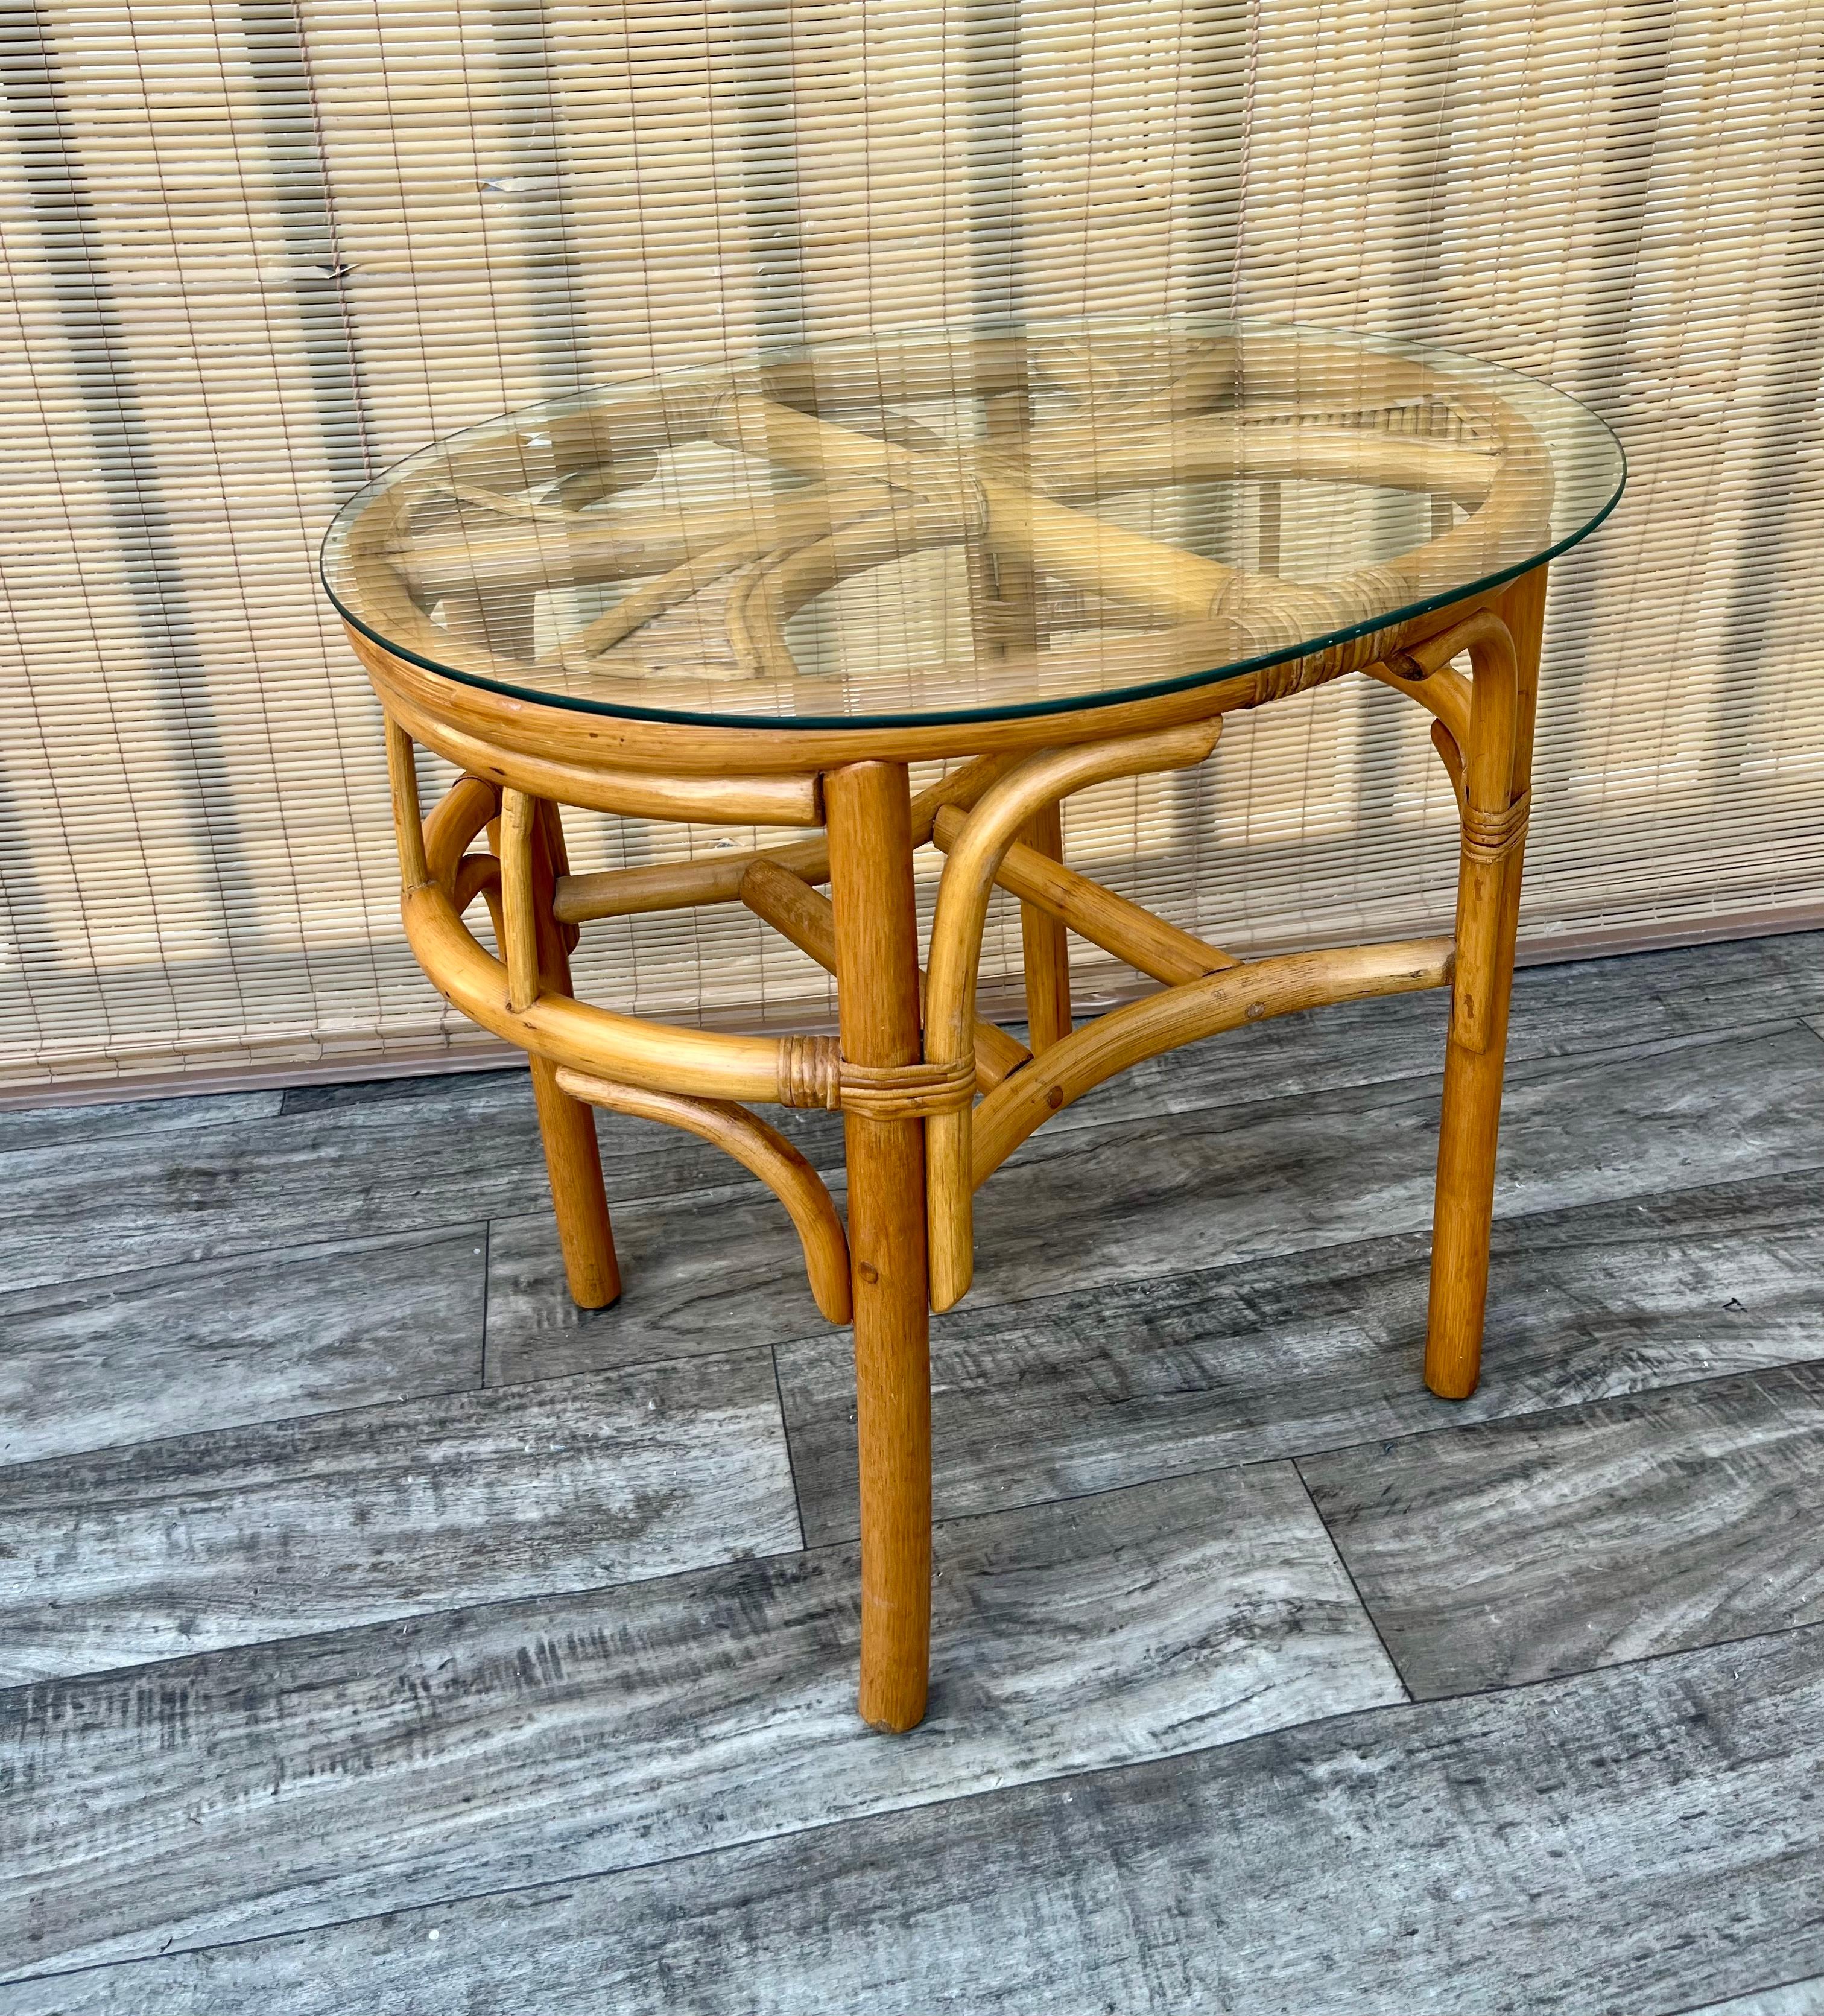 Vintage Costal Style/ Bohemian Split Bamboo and Rattan Boho Side Table. Circa 1980s
Features a sculpted rattan and split bamboo frame with oval shaped edges and a removable glass top. 
In excellent Original Condition with minor signs of wear and